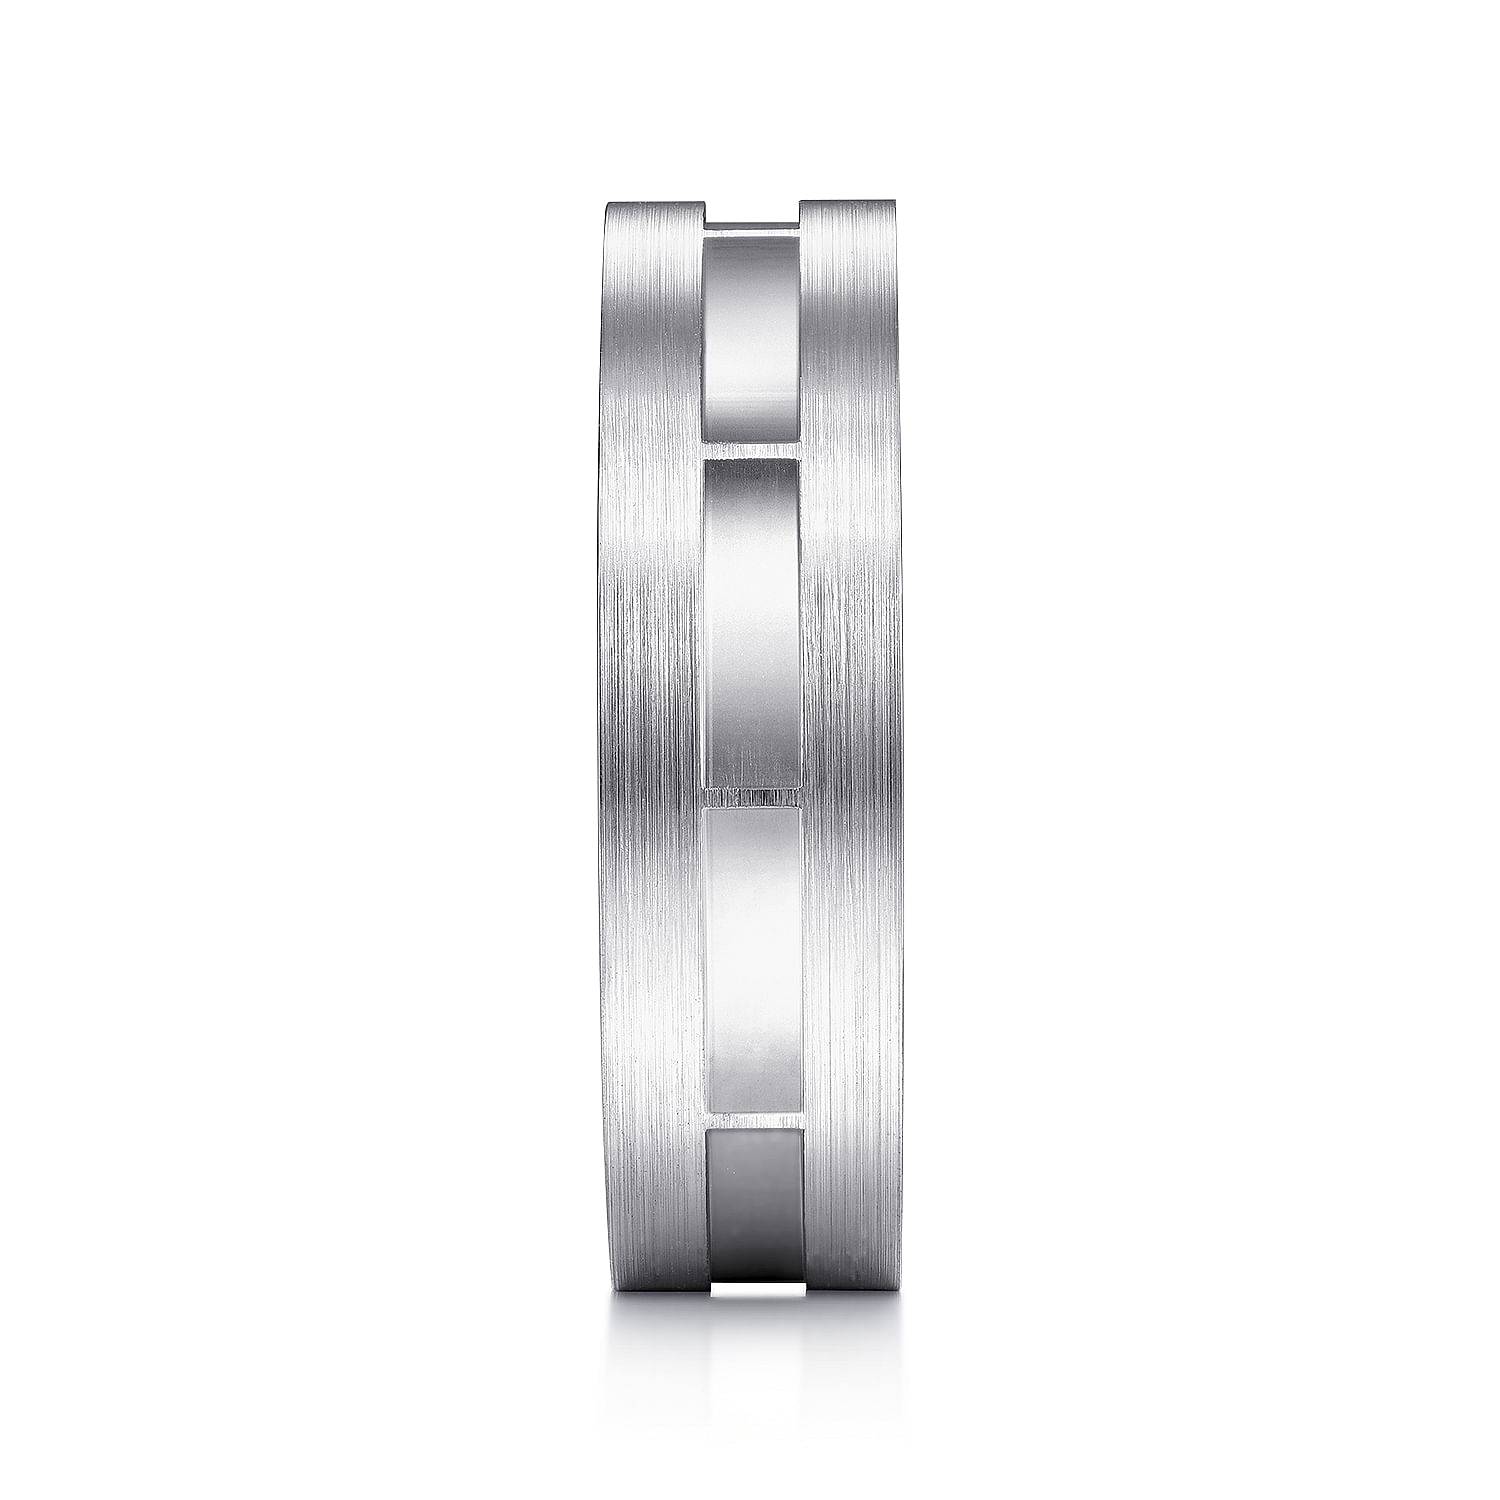 14K White Gold 6mm - Interwoven Men's Wedding Band in Brushed and Satin Finish